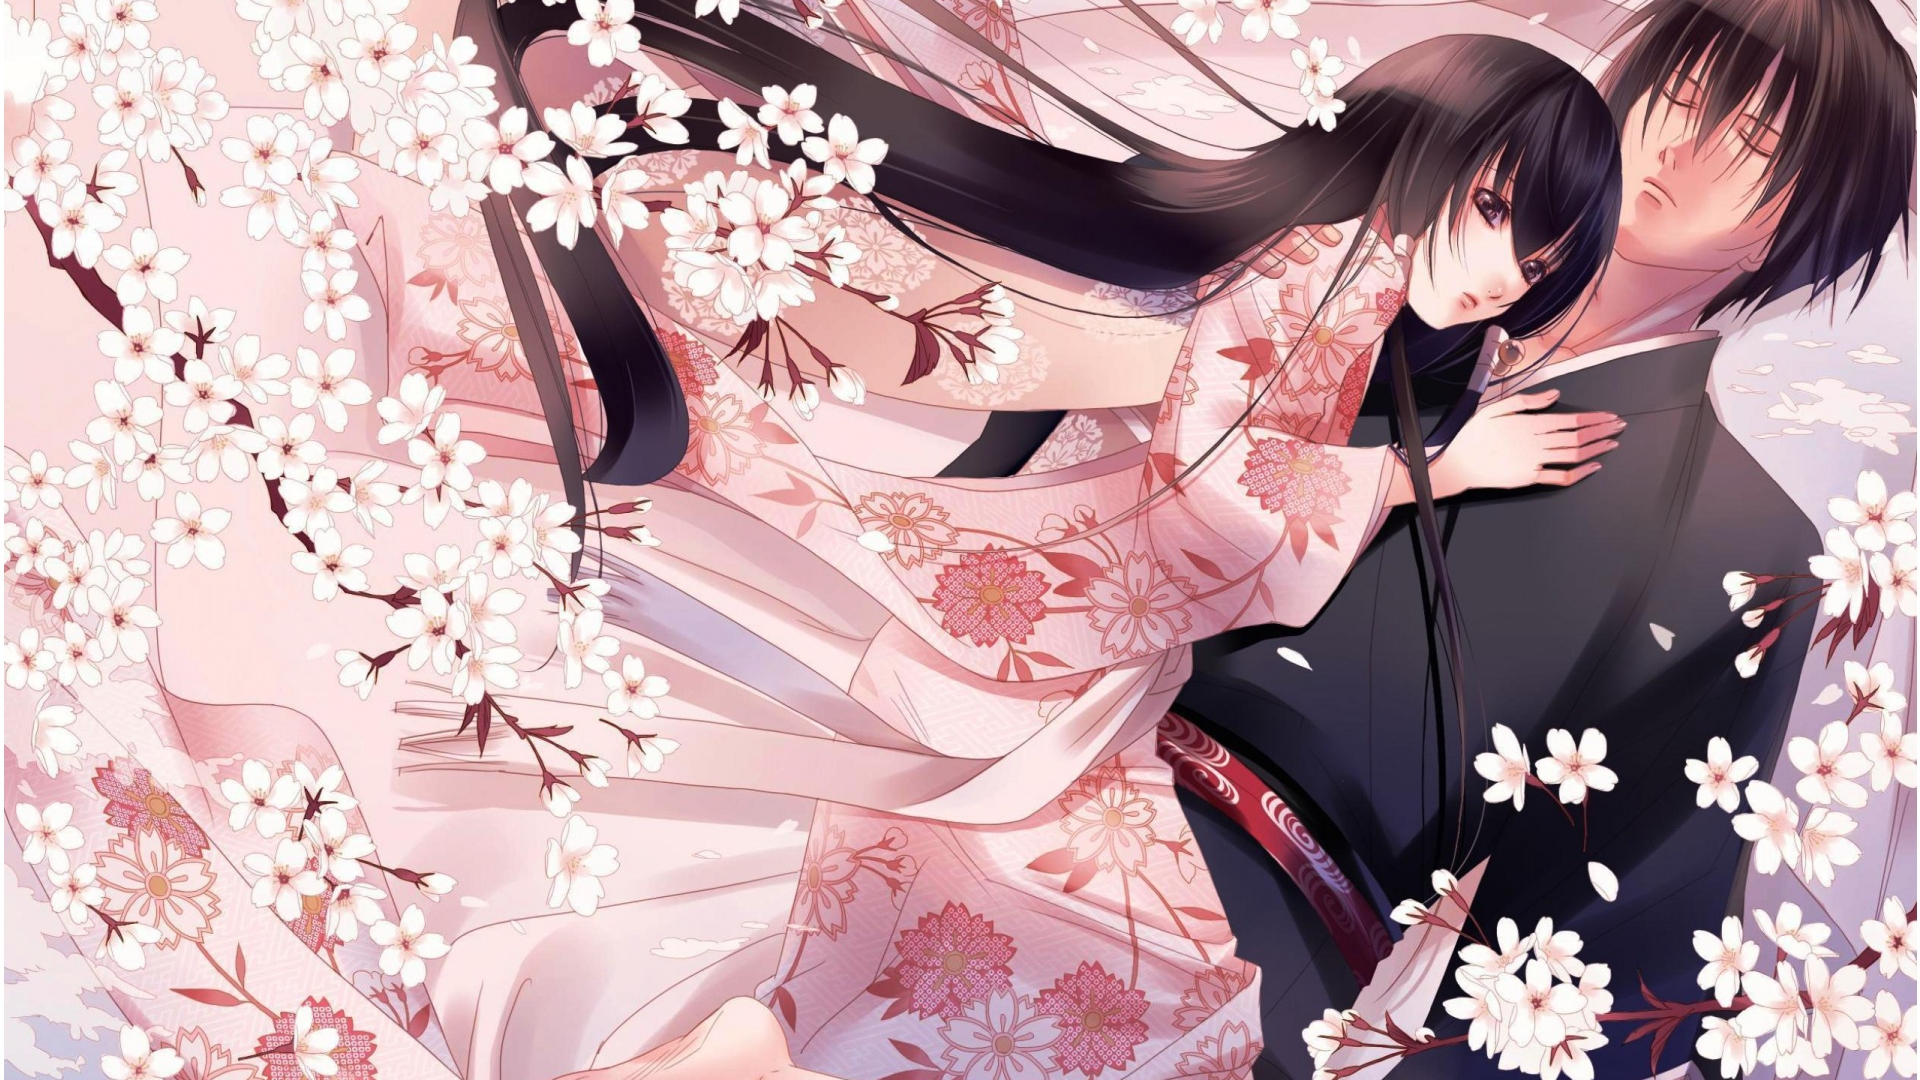 Free download Anime Couple Pink Flower 1920 x 1200 Download Close [1920x1200] for your Desktop, Mobile & Tablet. Explore Pink Anime Wallpaper. Cool Pink Wallpaper, Pink Flowers Desktop Wallpaper, Cool Anime Wallpaper HD